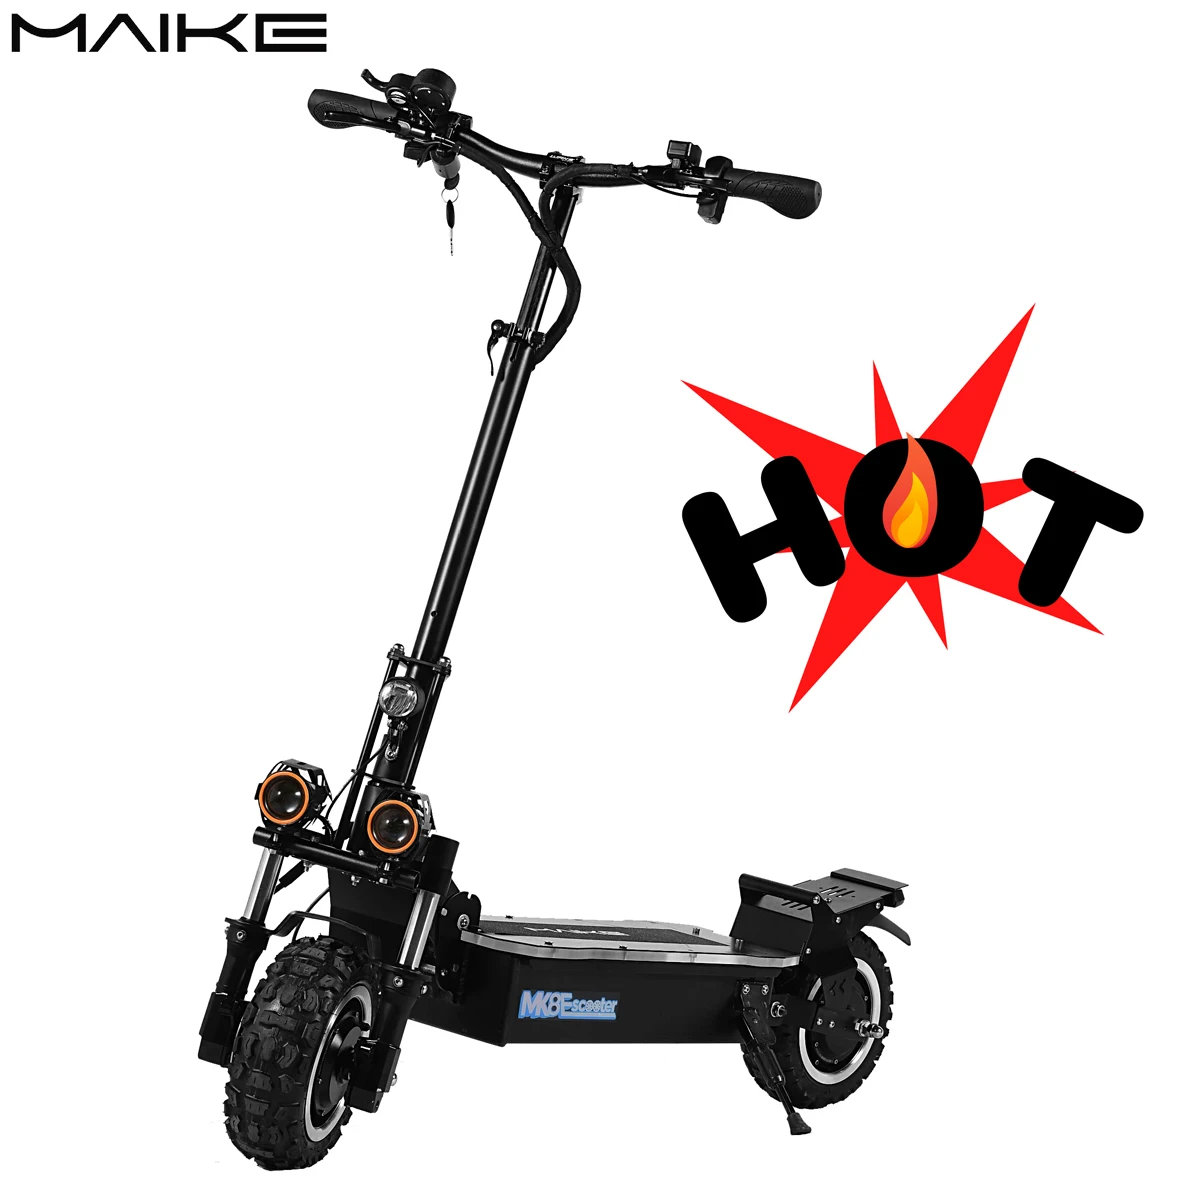 

Maike mk8 60v 11 inch fat tire powerful 3200w dual motor off road e scooter china folding electric mobility scooter adult